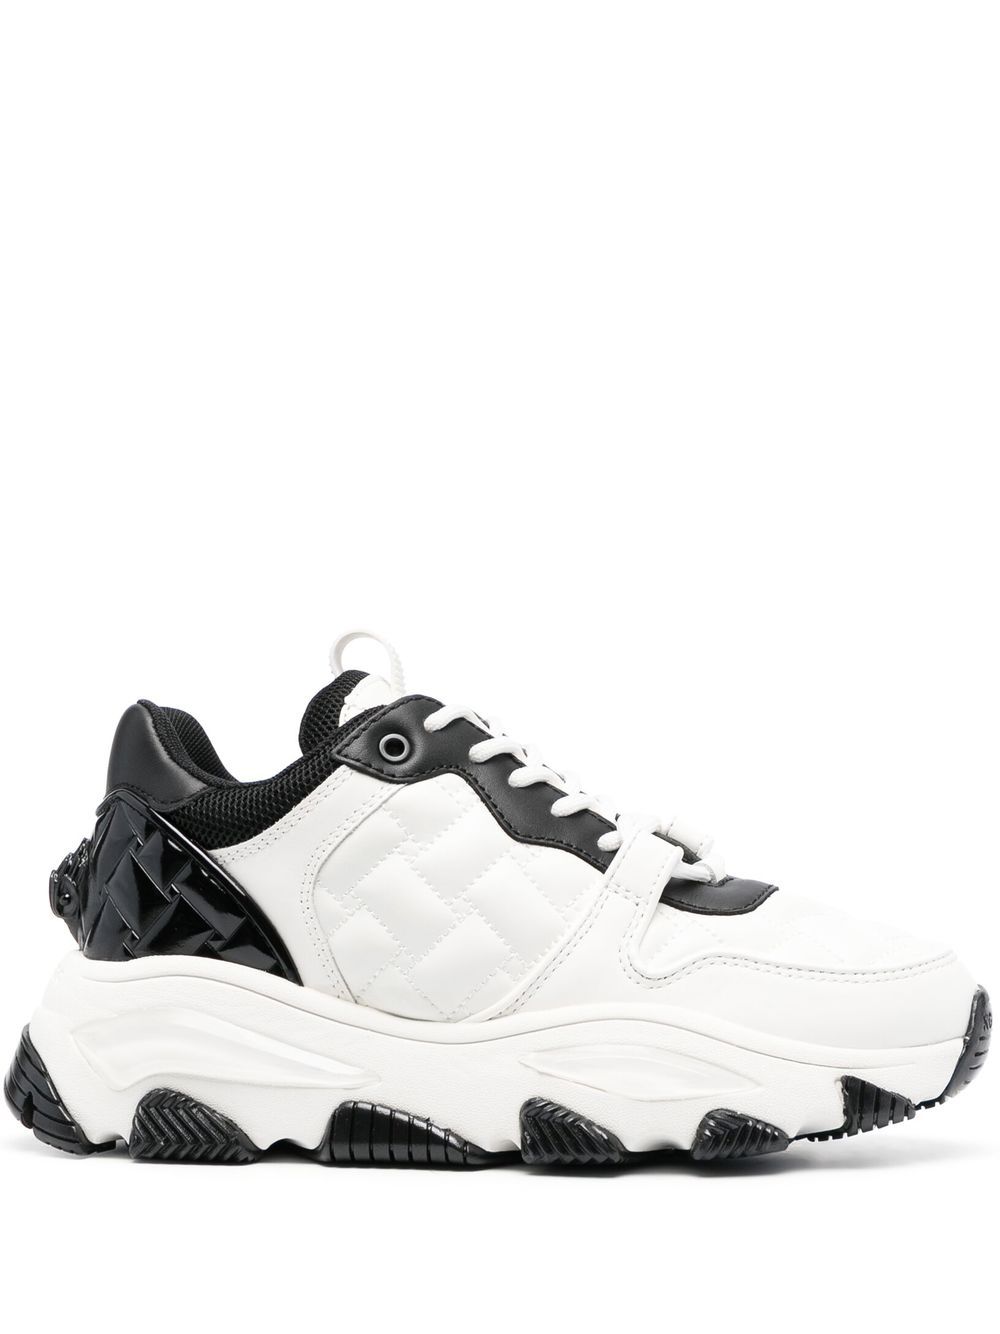 Kurt Geiger London quilted-panel low-top Sneakers - Farfetch